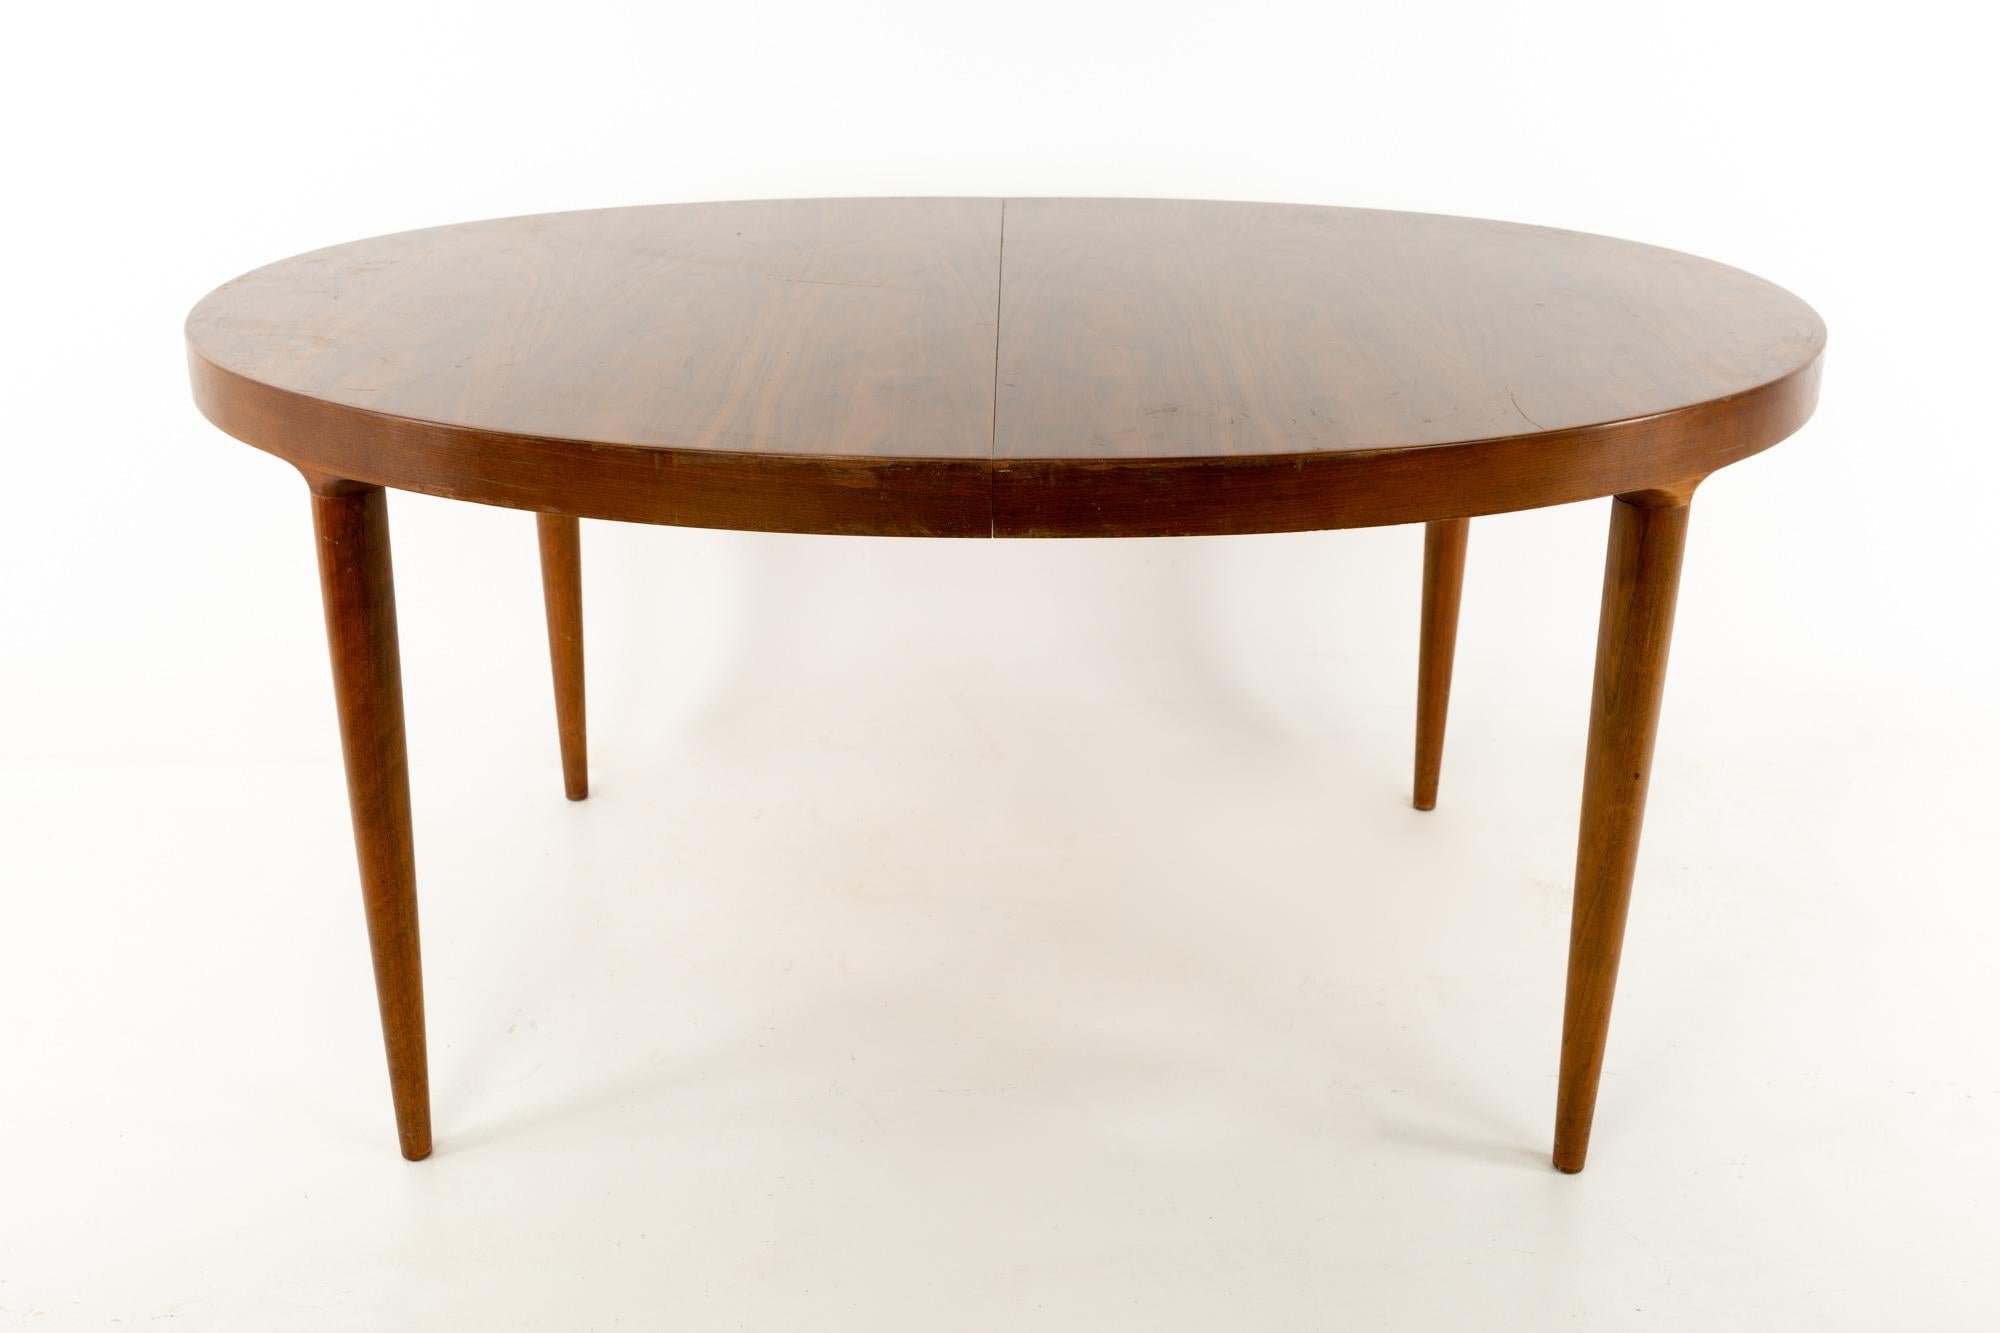 Moreddi midcentury Danish modern walnut oval dining table
This table is 59 wide x 43 deep x 28.5 inches high and each of the two leaves is 19.5 inches; for a total table width of 98 inches

?All pieces of furniture can be had in what we call